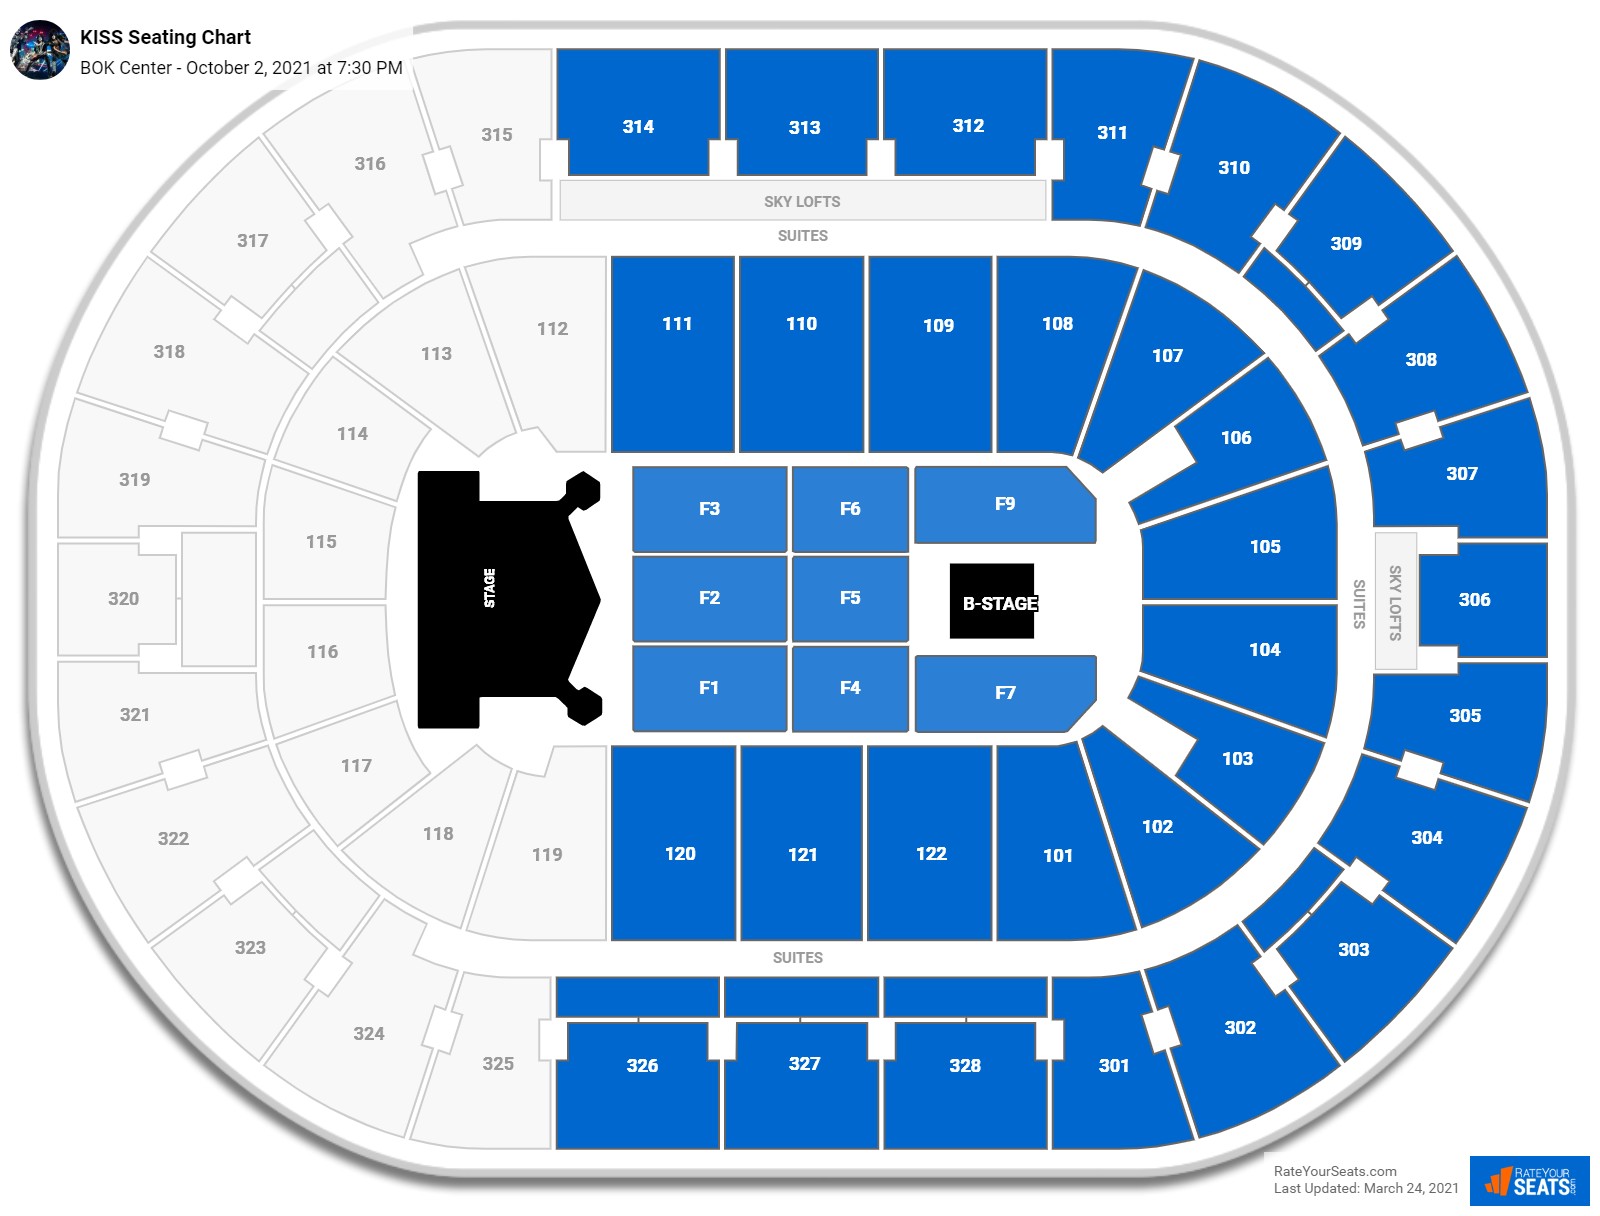 BOK Center Seating Charts for Concerts